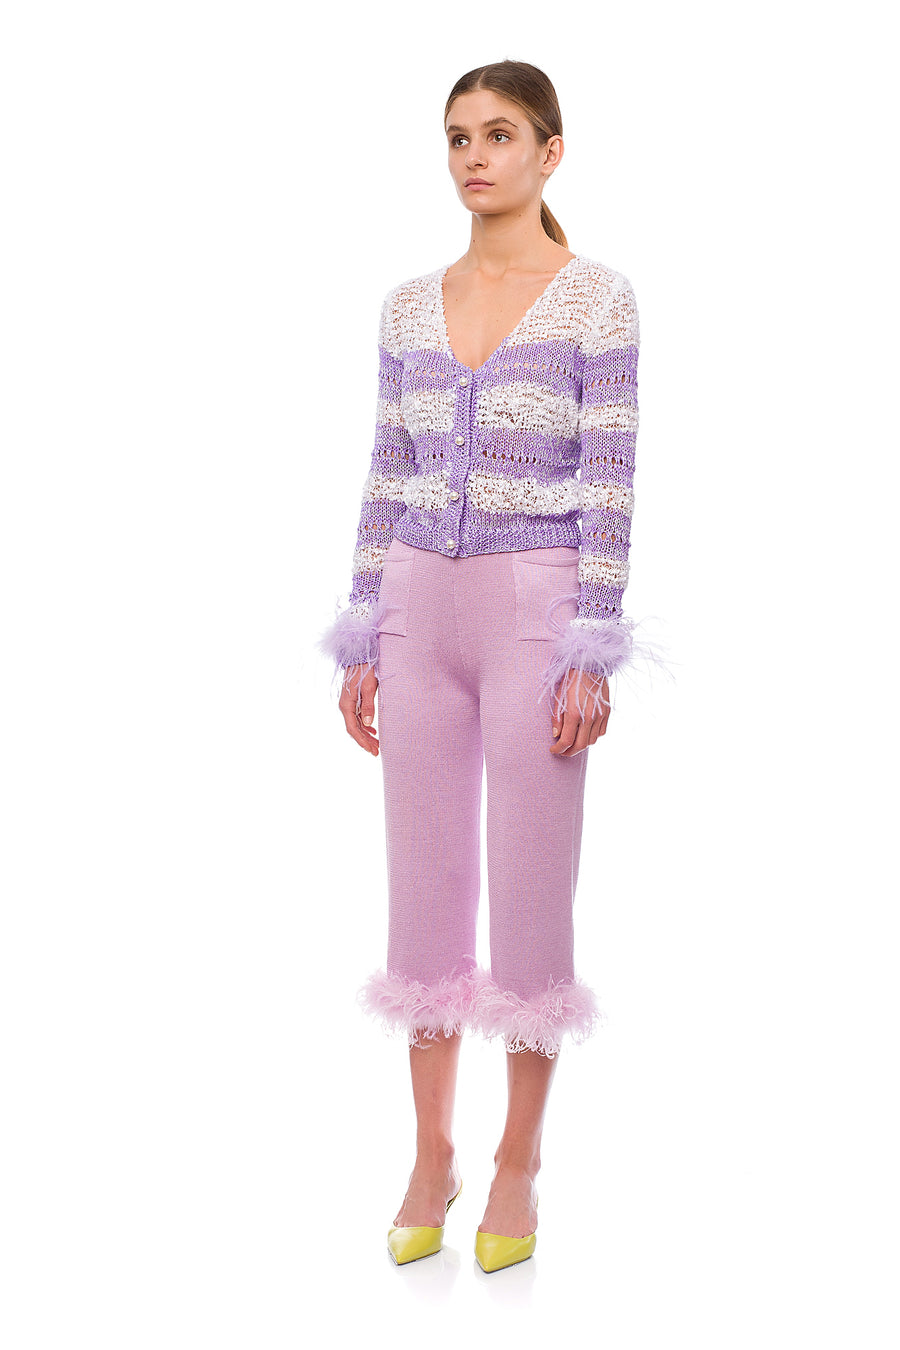 Lavender Handmade Knit Sweater With Detachable Feather Details On The Cuffs and Pearl Buttons